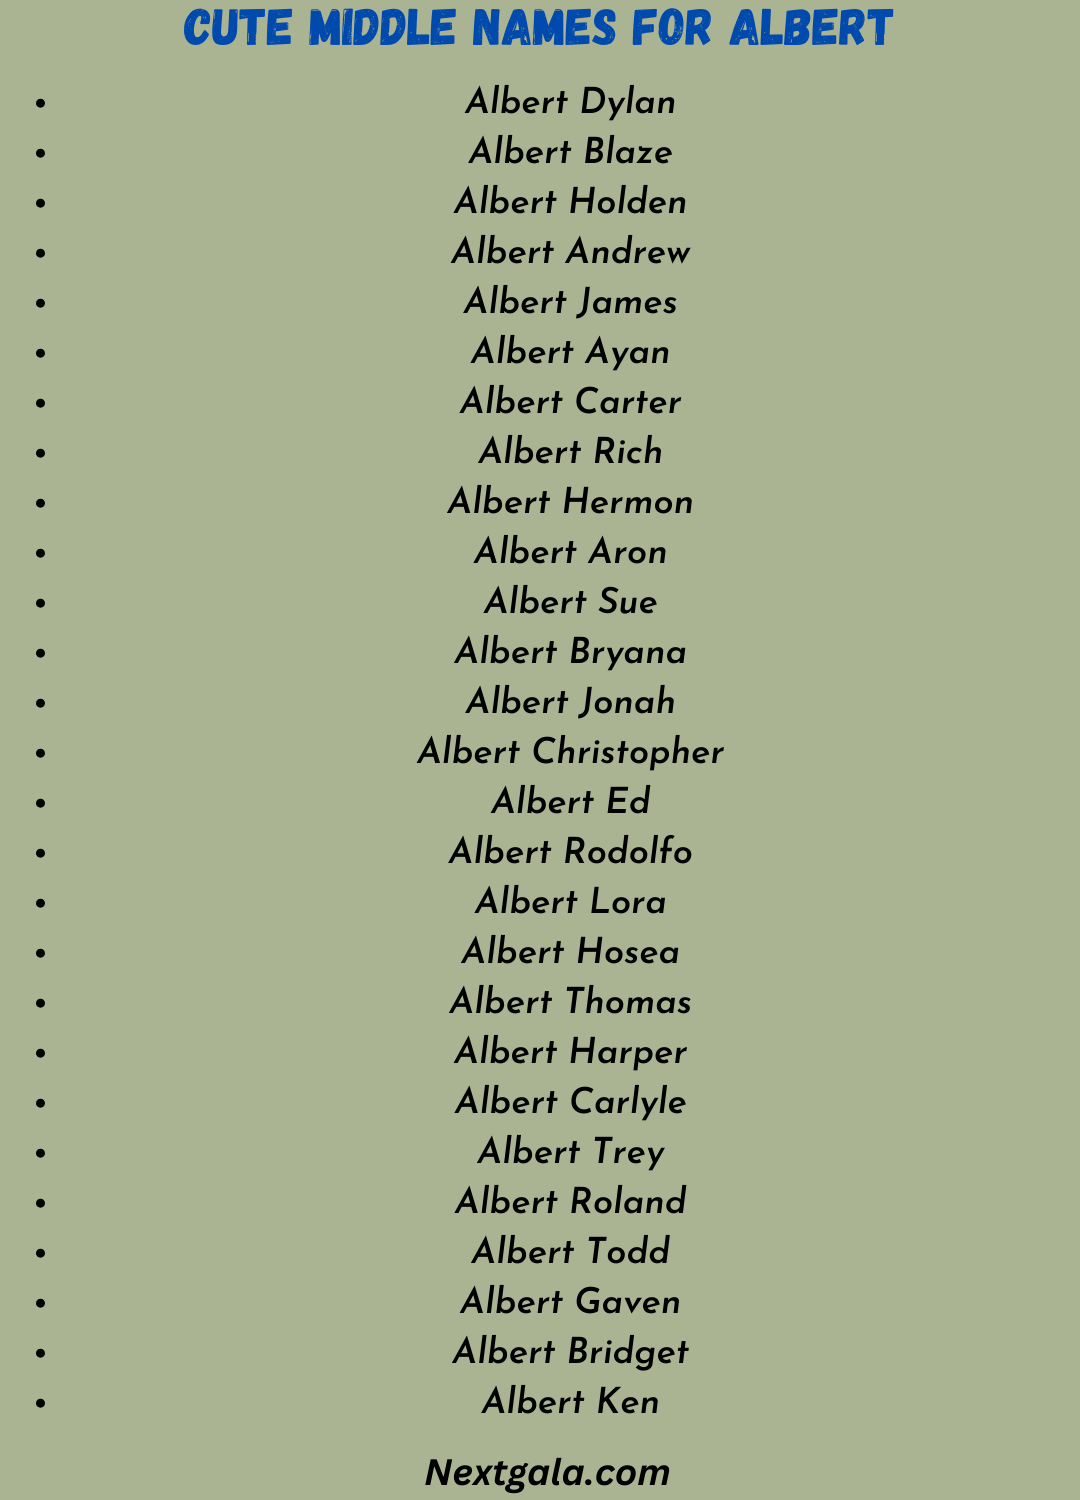 Cute Middle Names for Albert